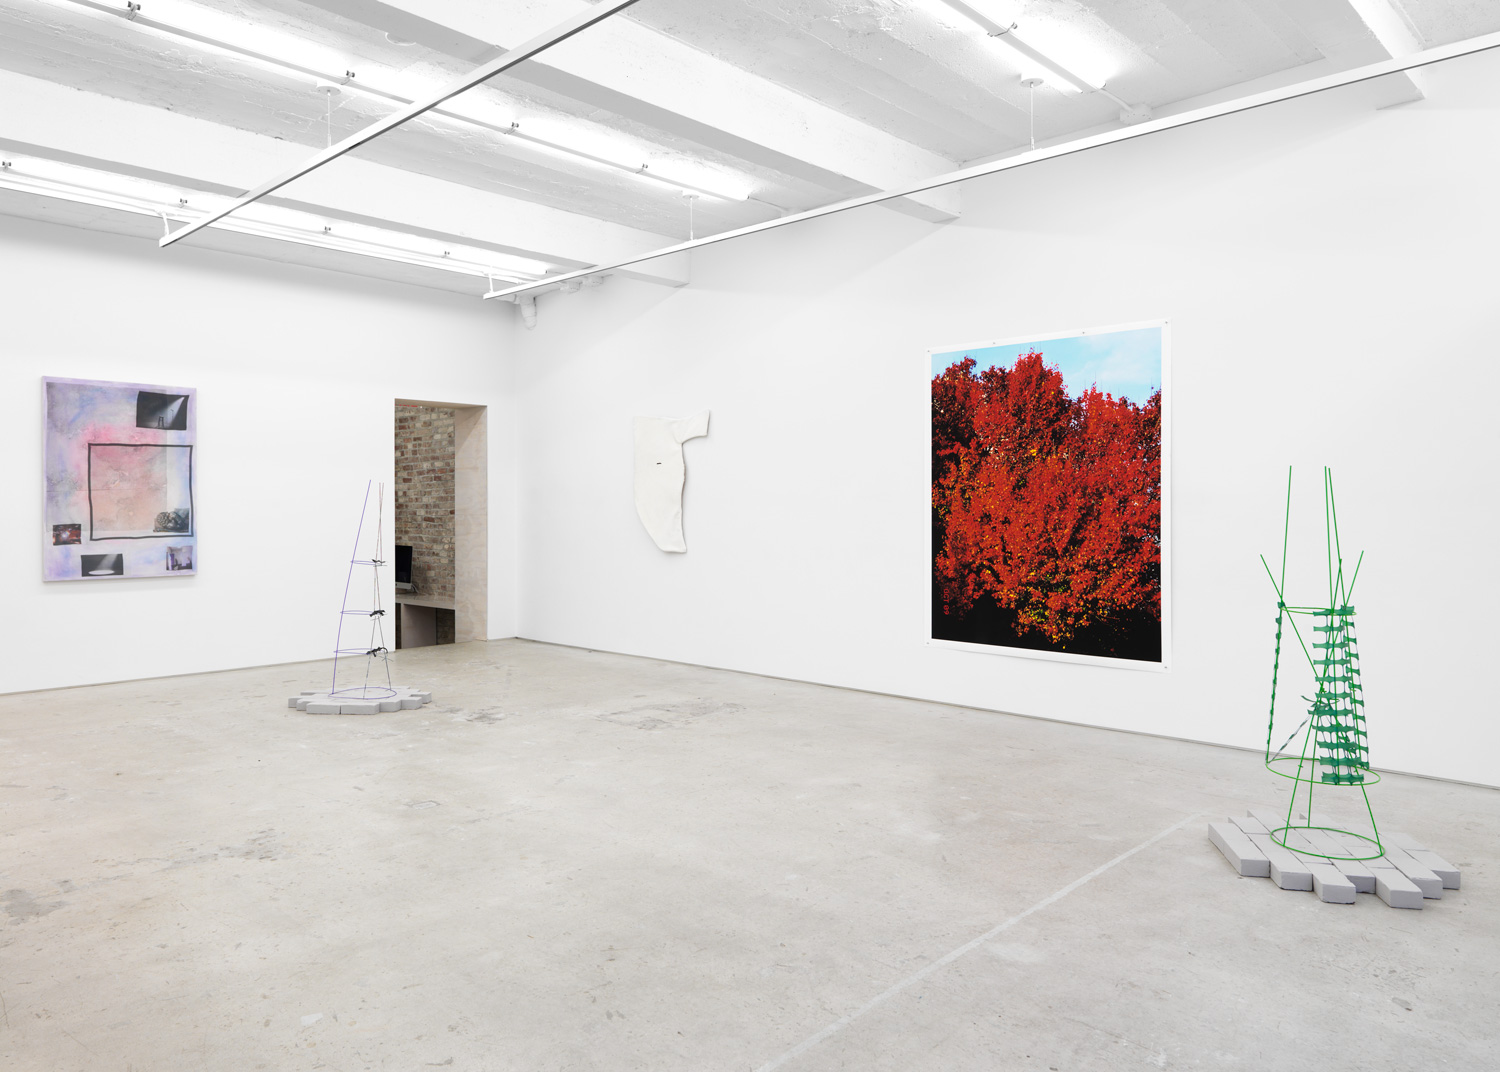 Installation view, Frame Structures, Magenta Plains, New York, NY, 2018